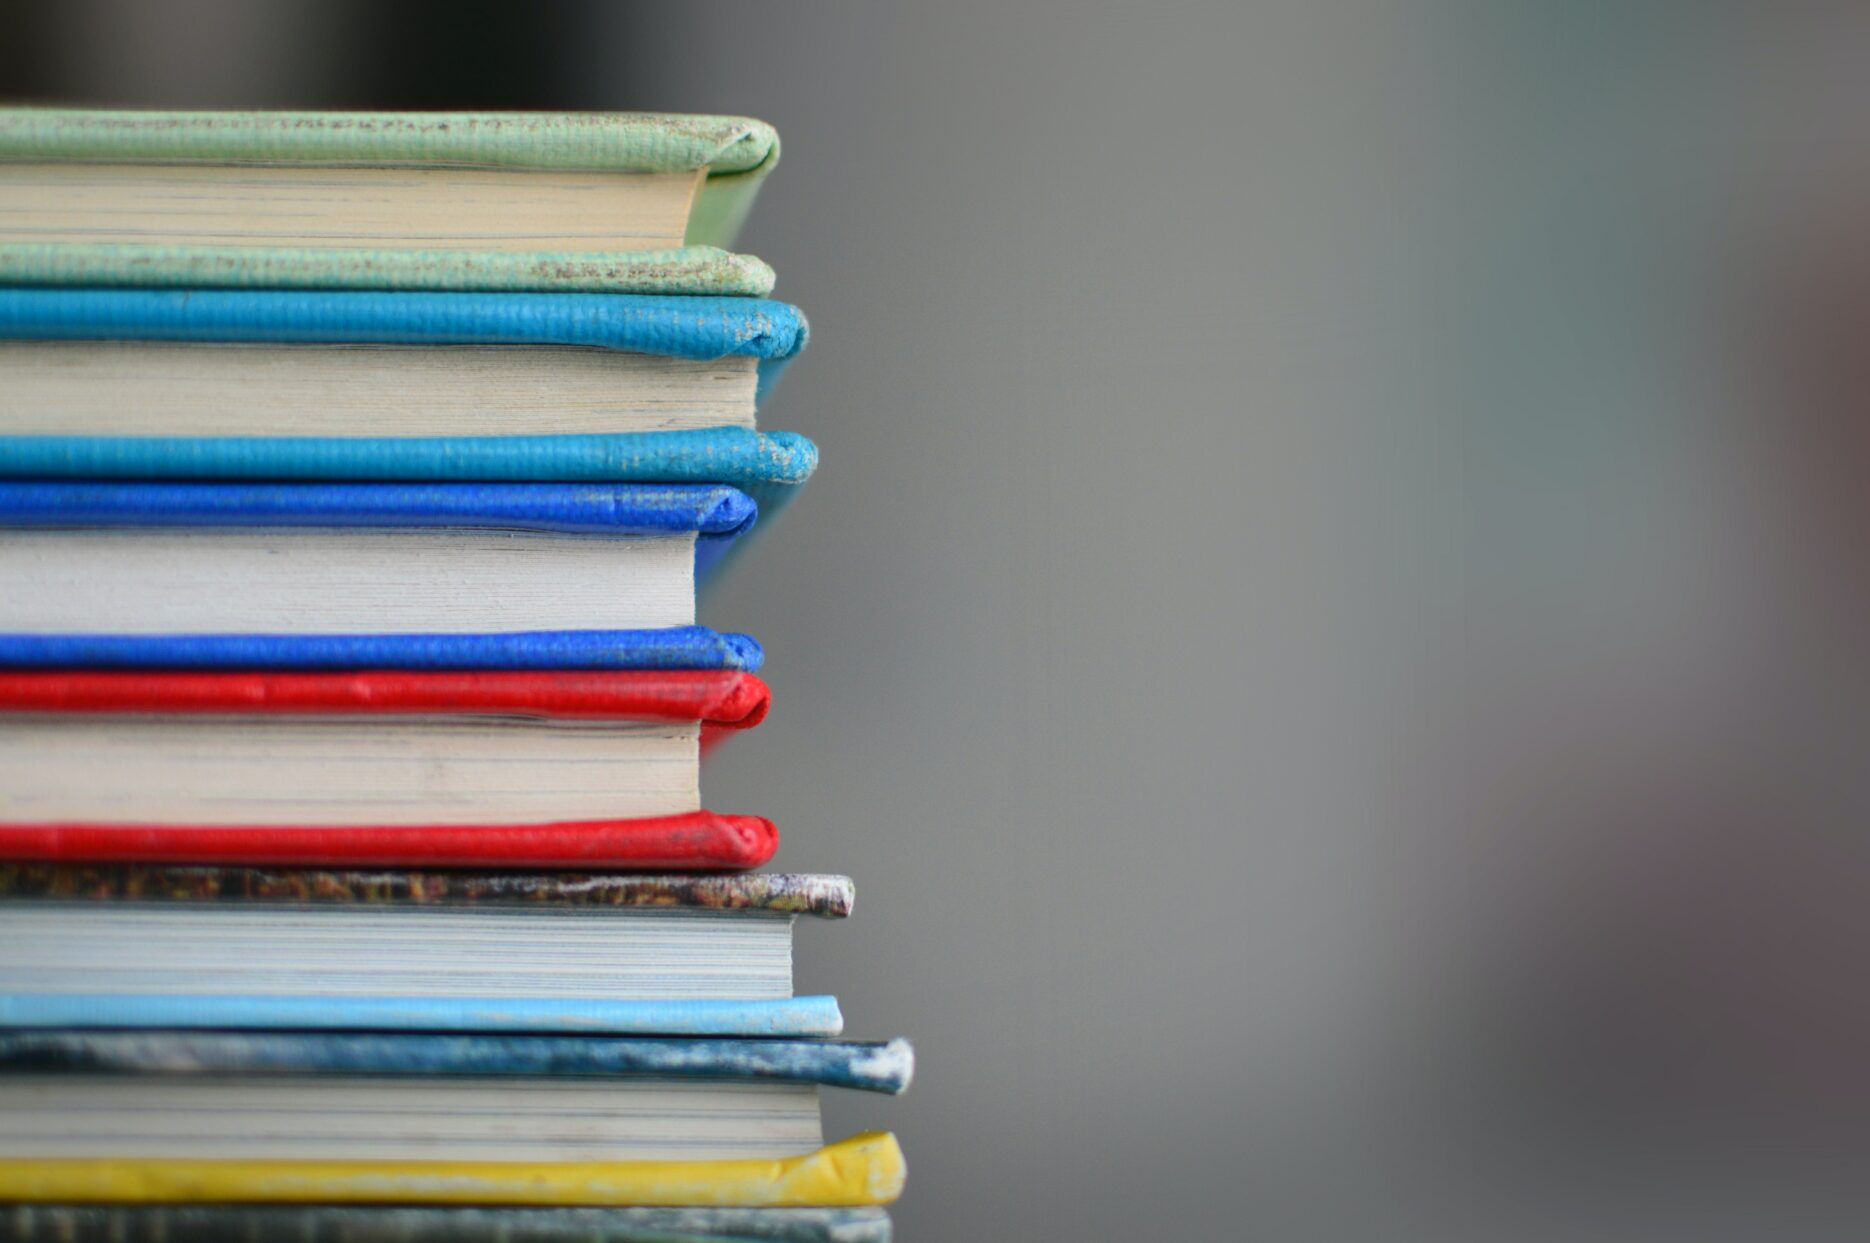 A stack of colourful hardcover books, oriented to the left of the image.